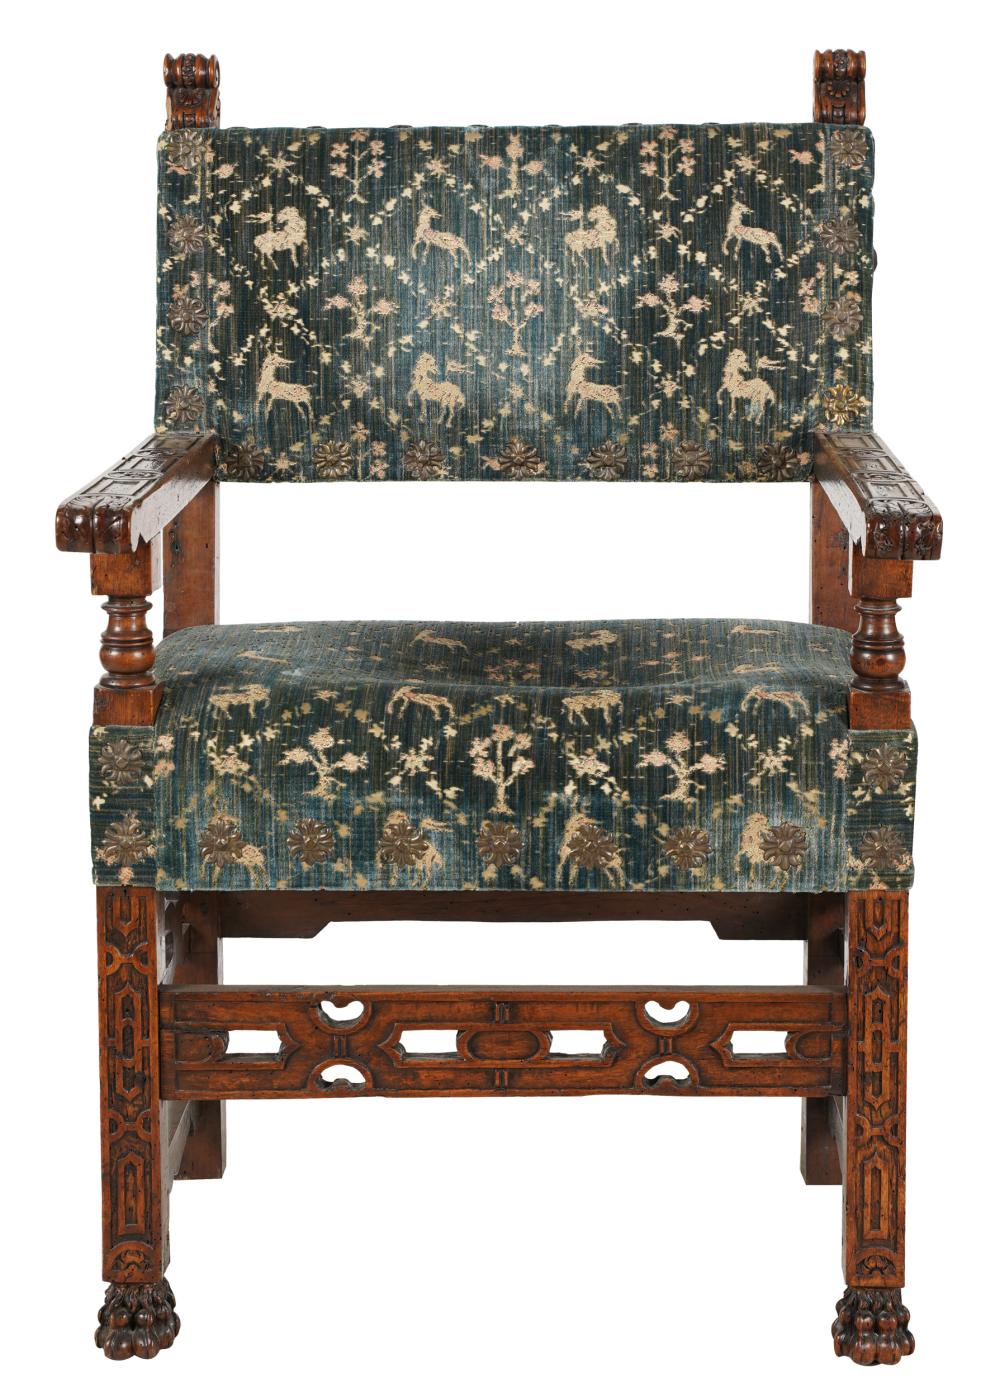 SPANISH REVIVAL CARVED WALNUT ARMCHAIRcovered